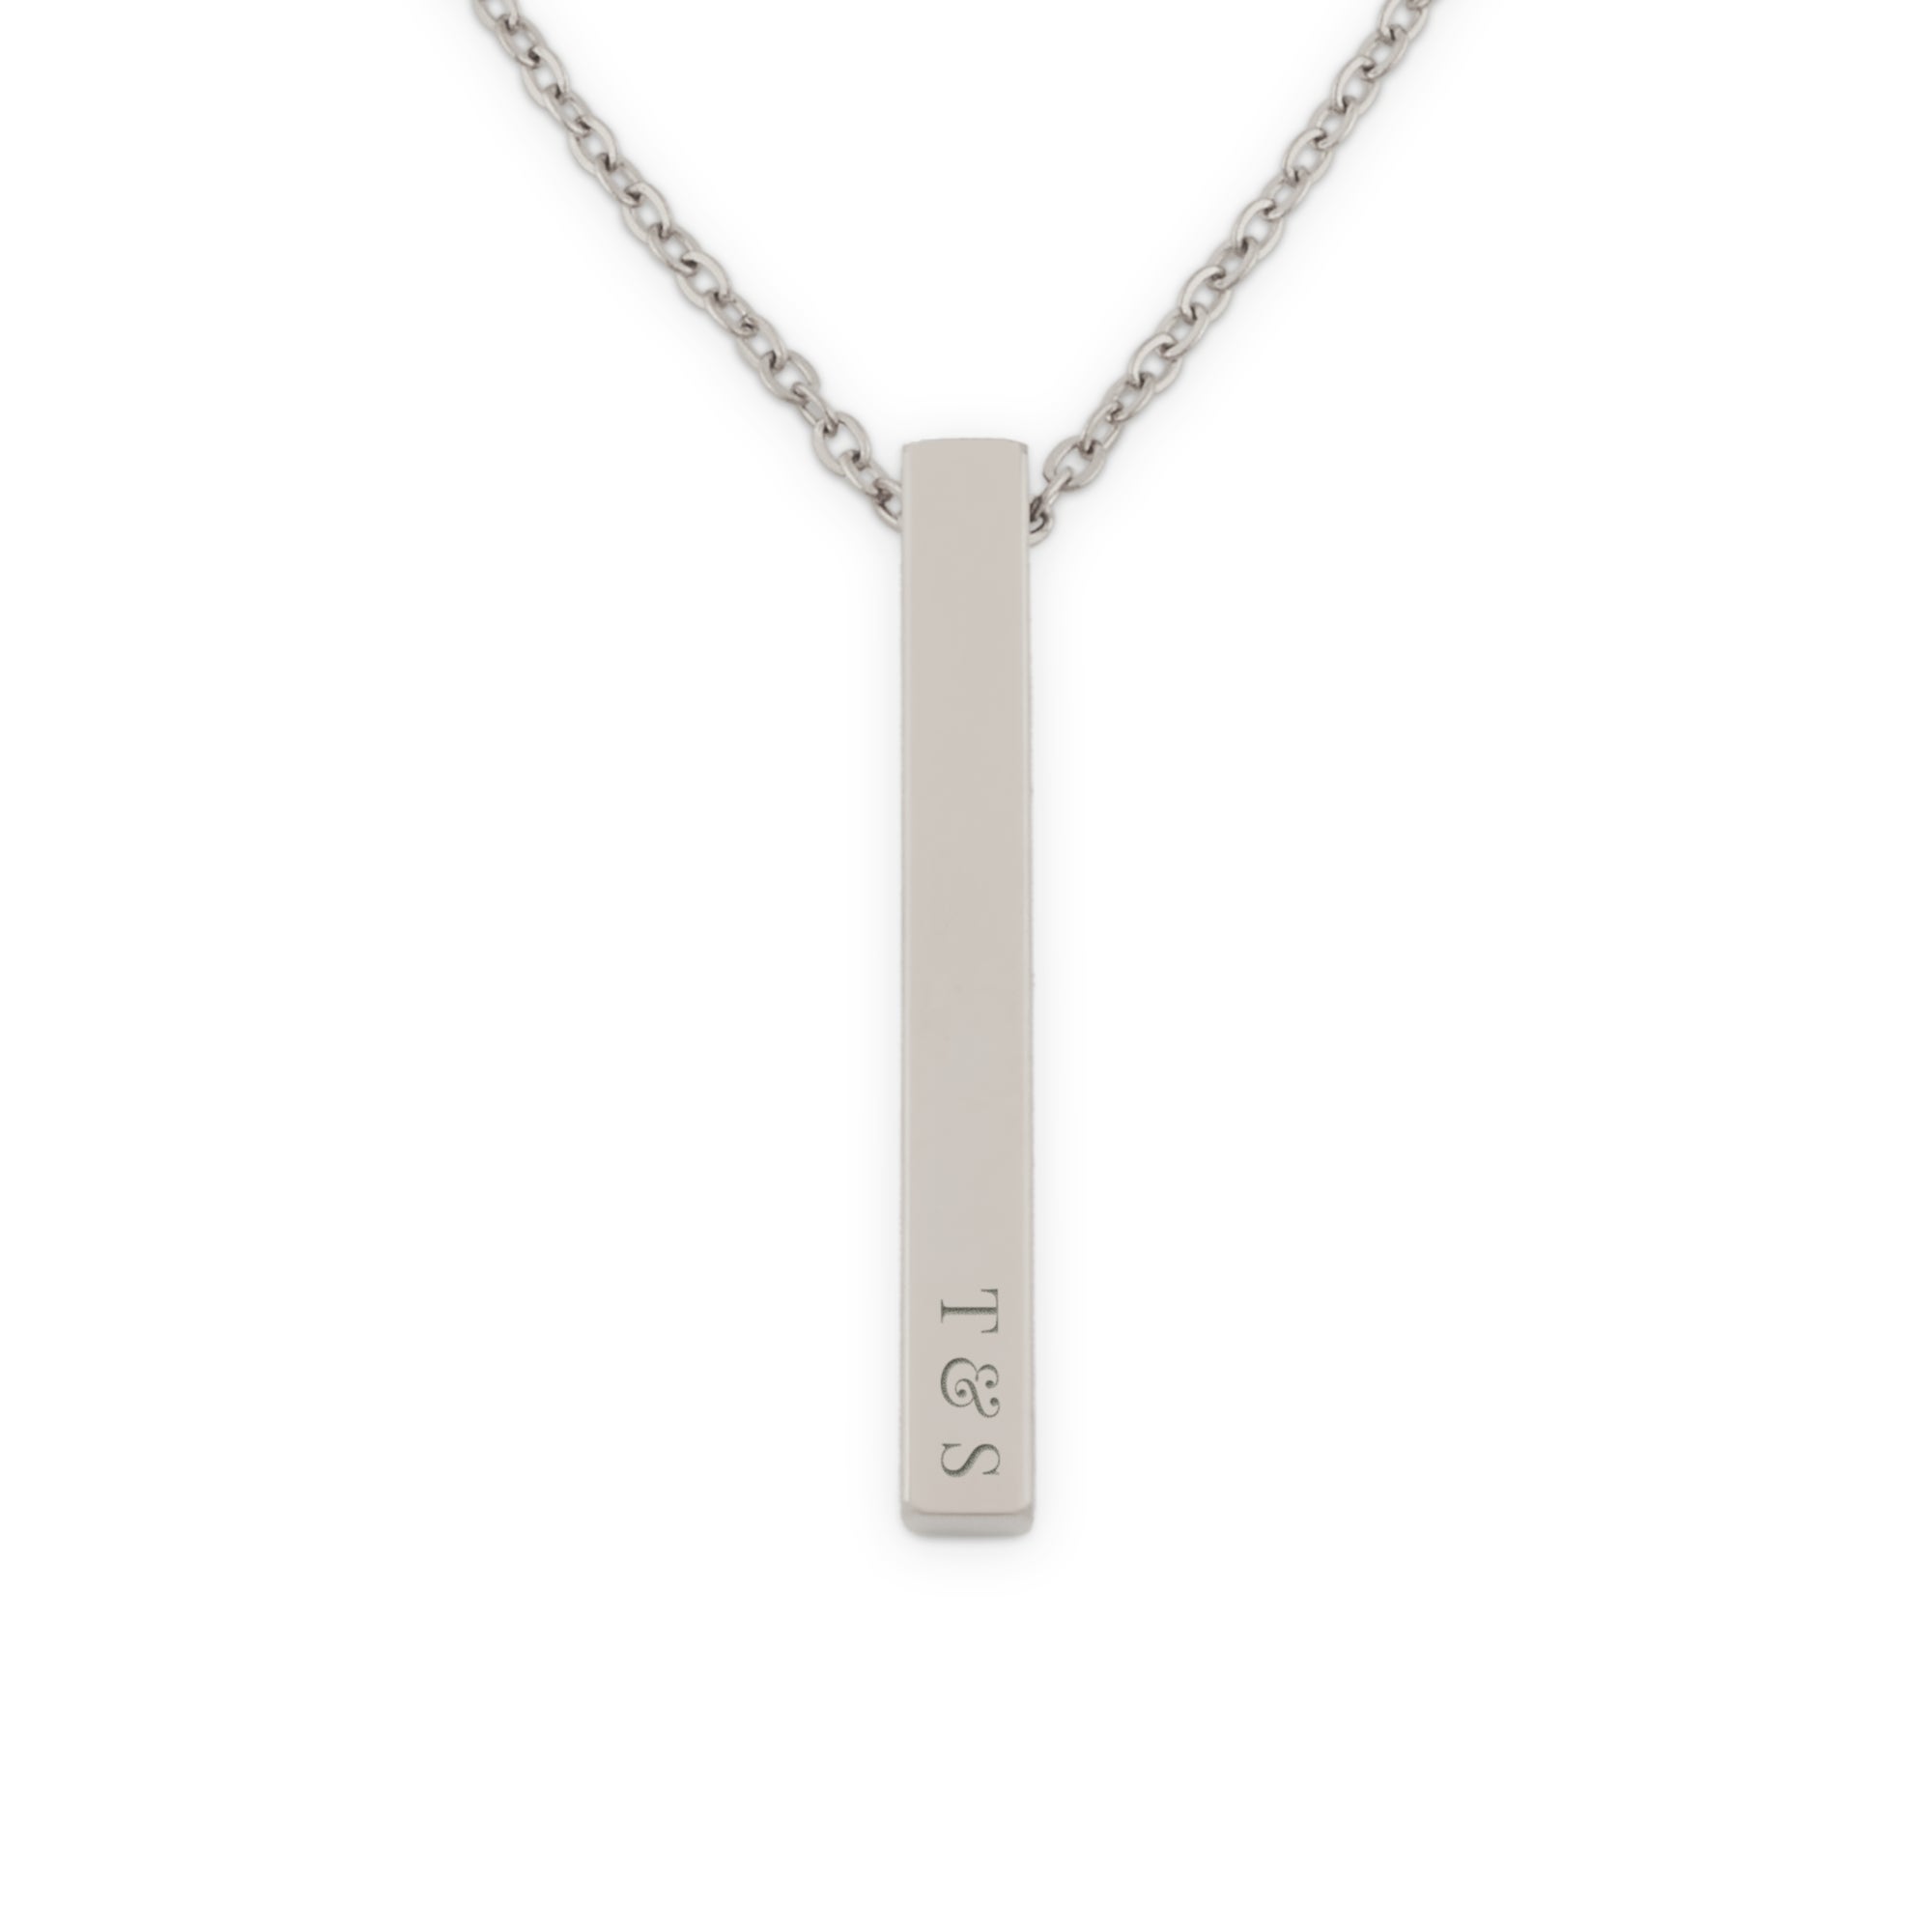 Bar necklace with name - Silver